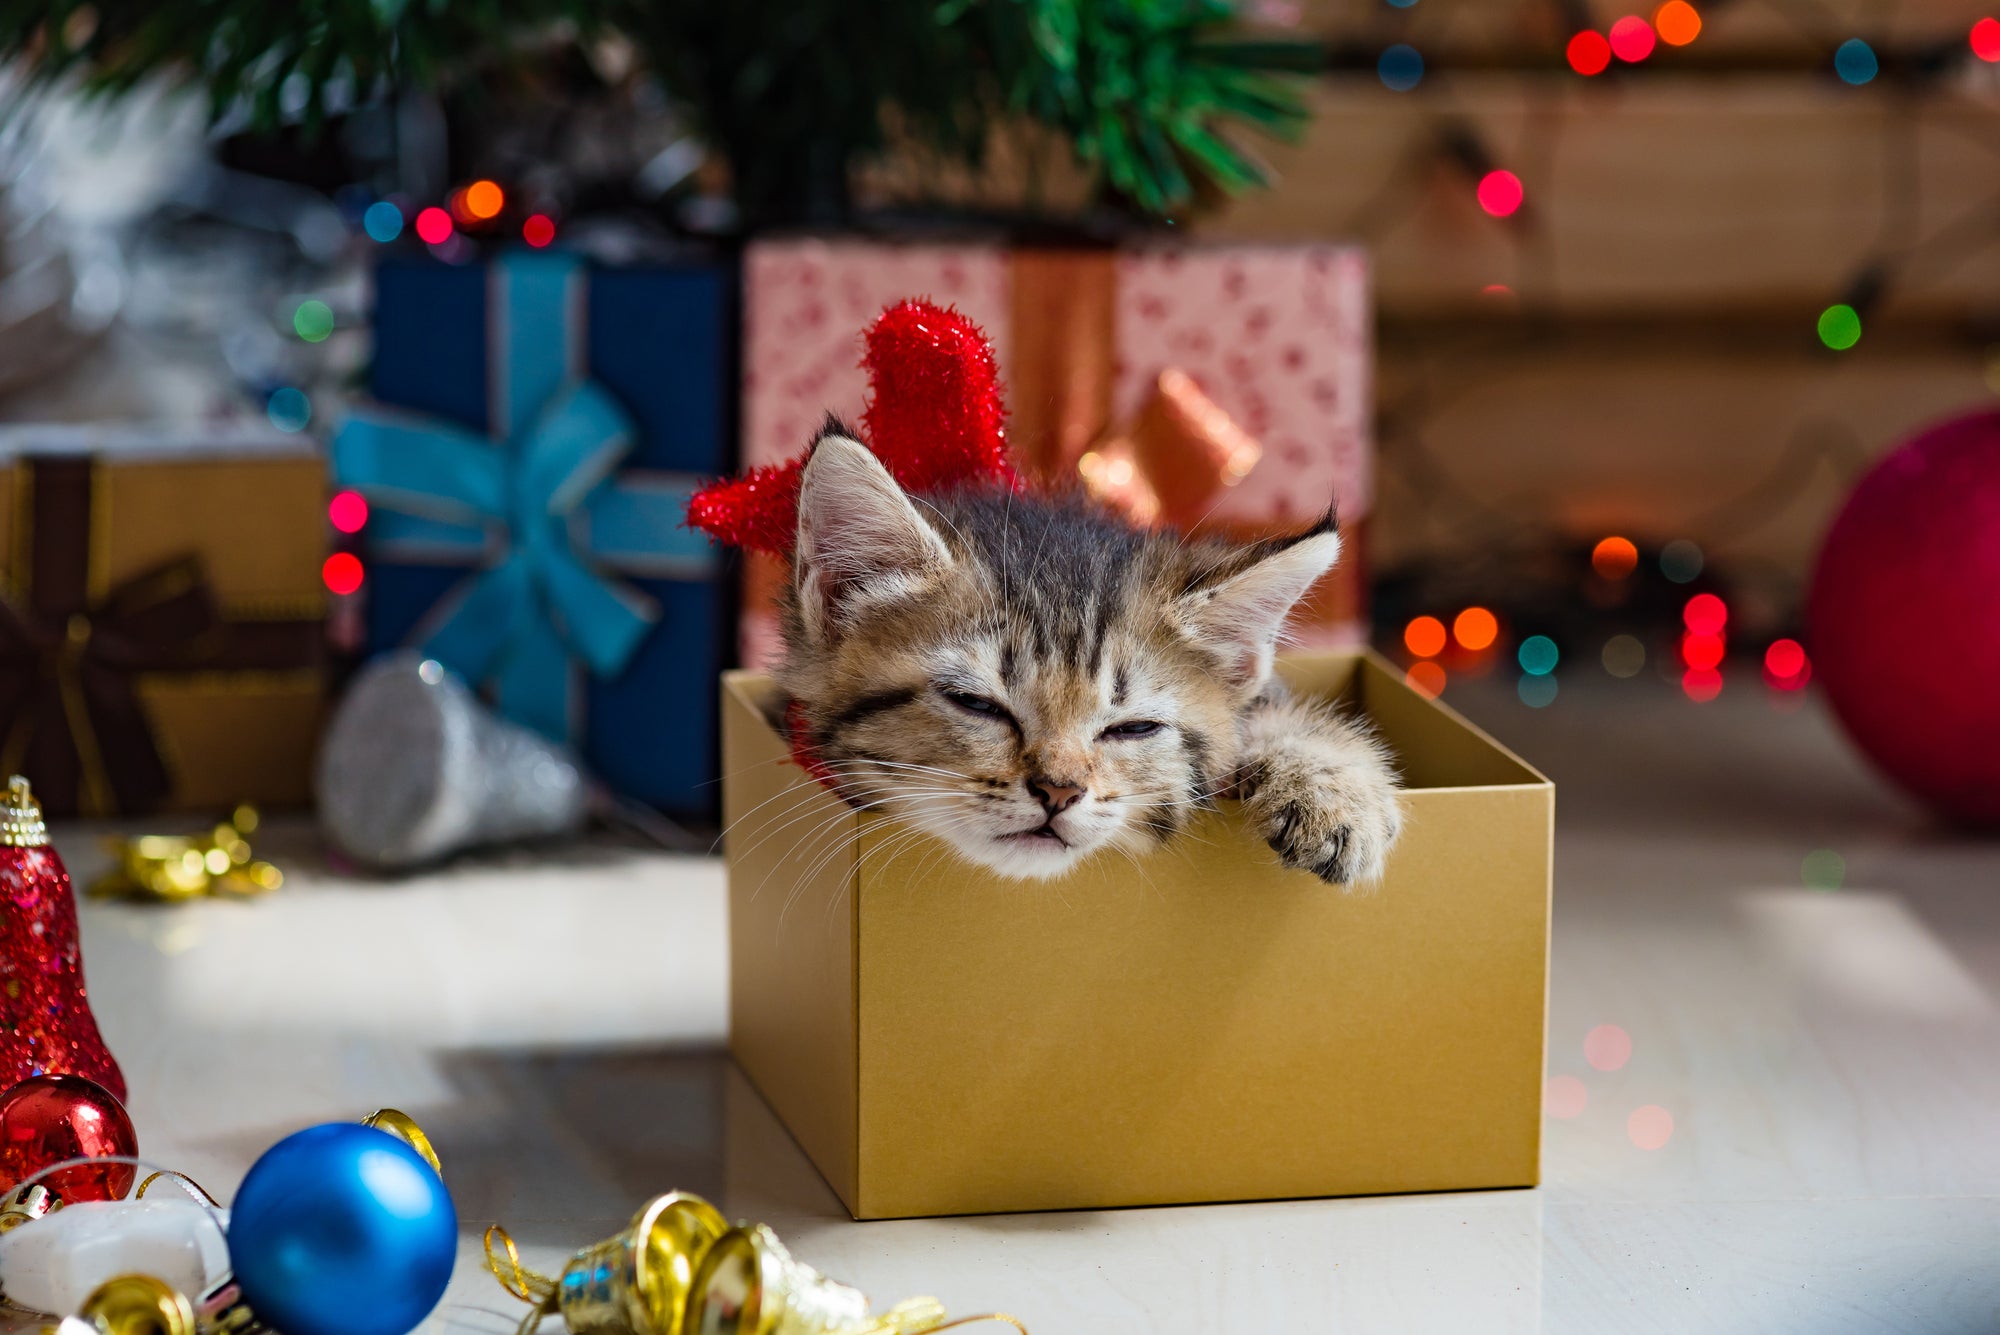 A cat wearing red antlers sleeps in a box, a festive Christmas scene.